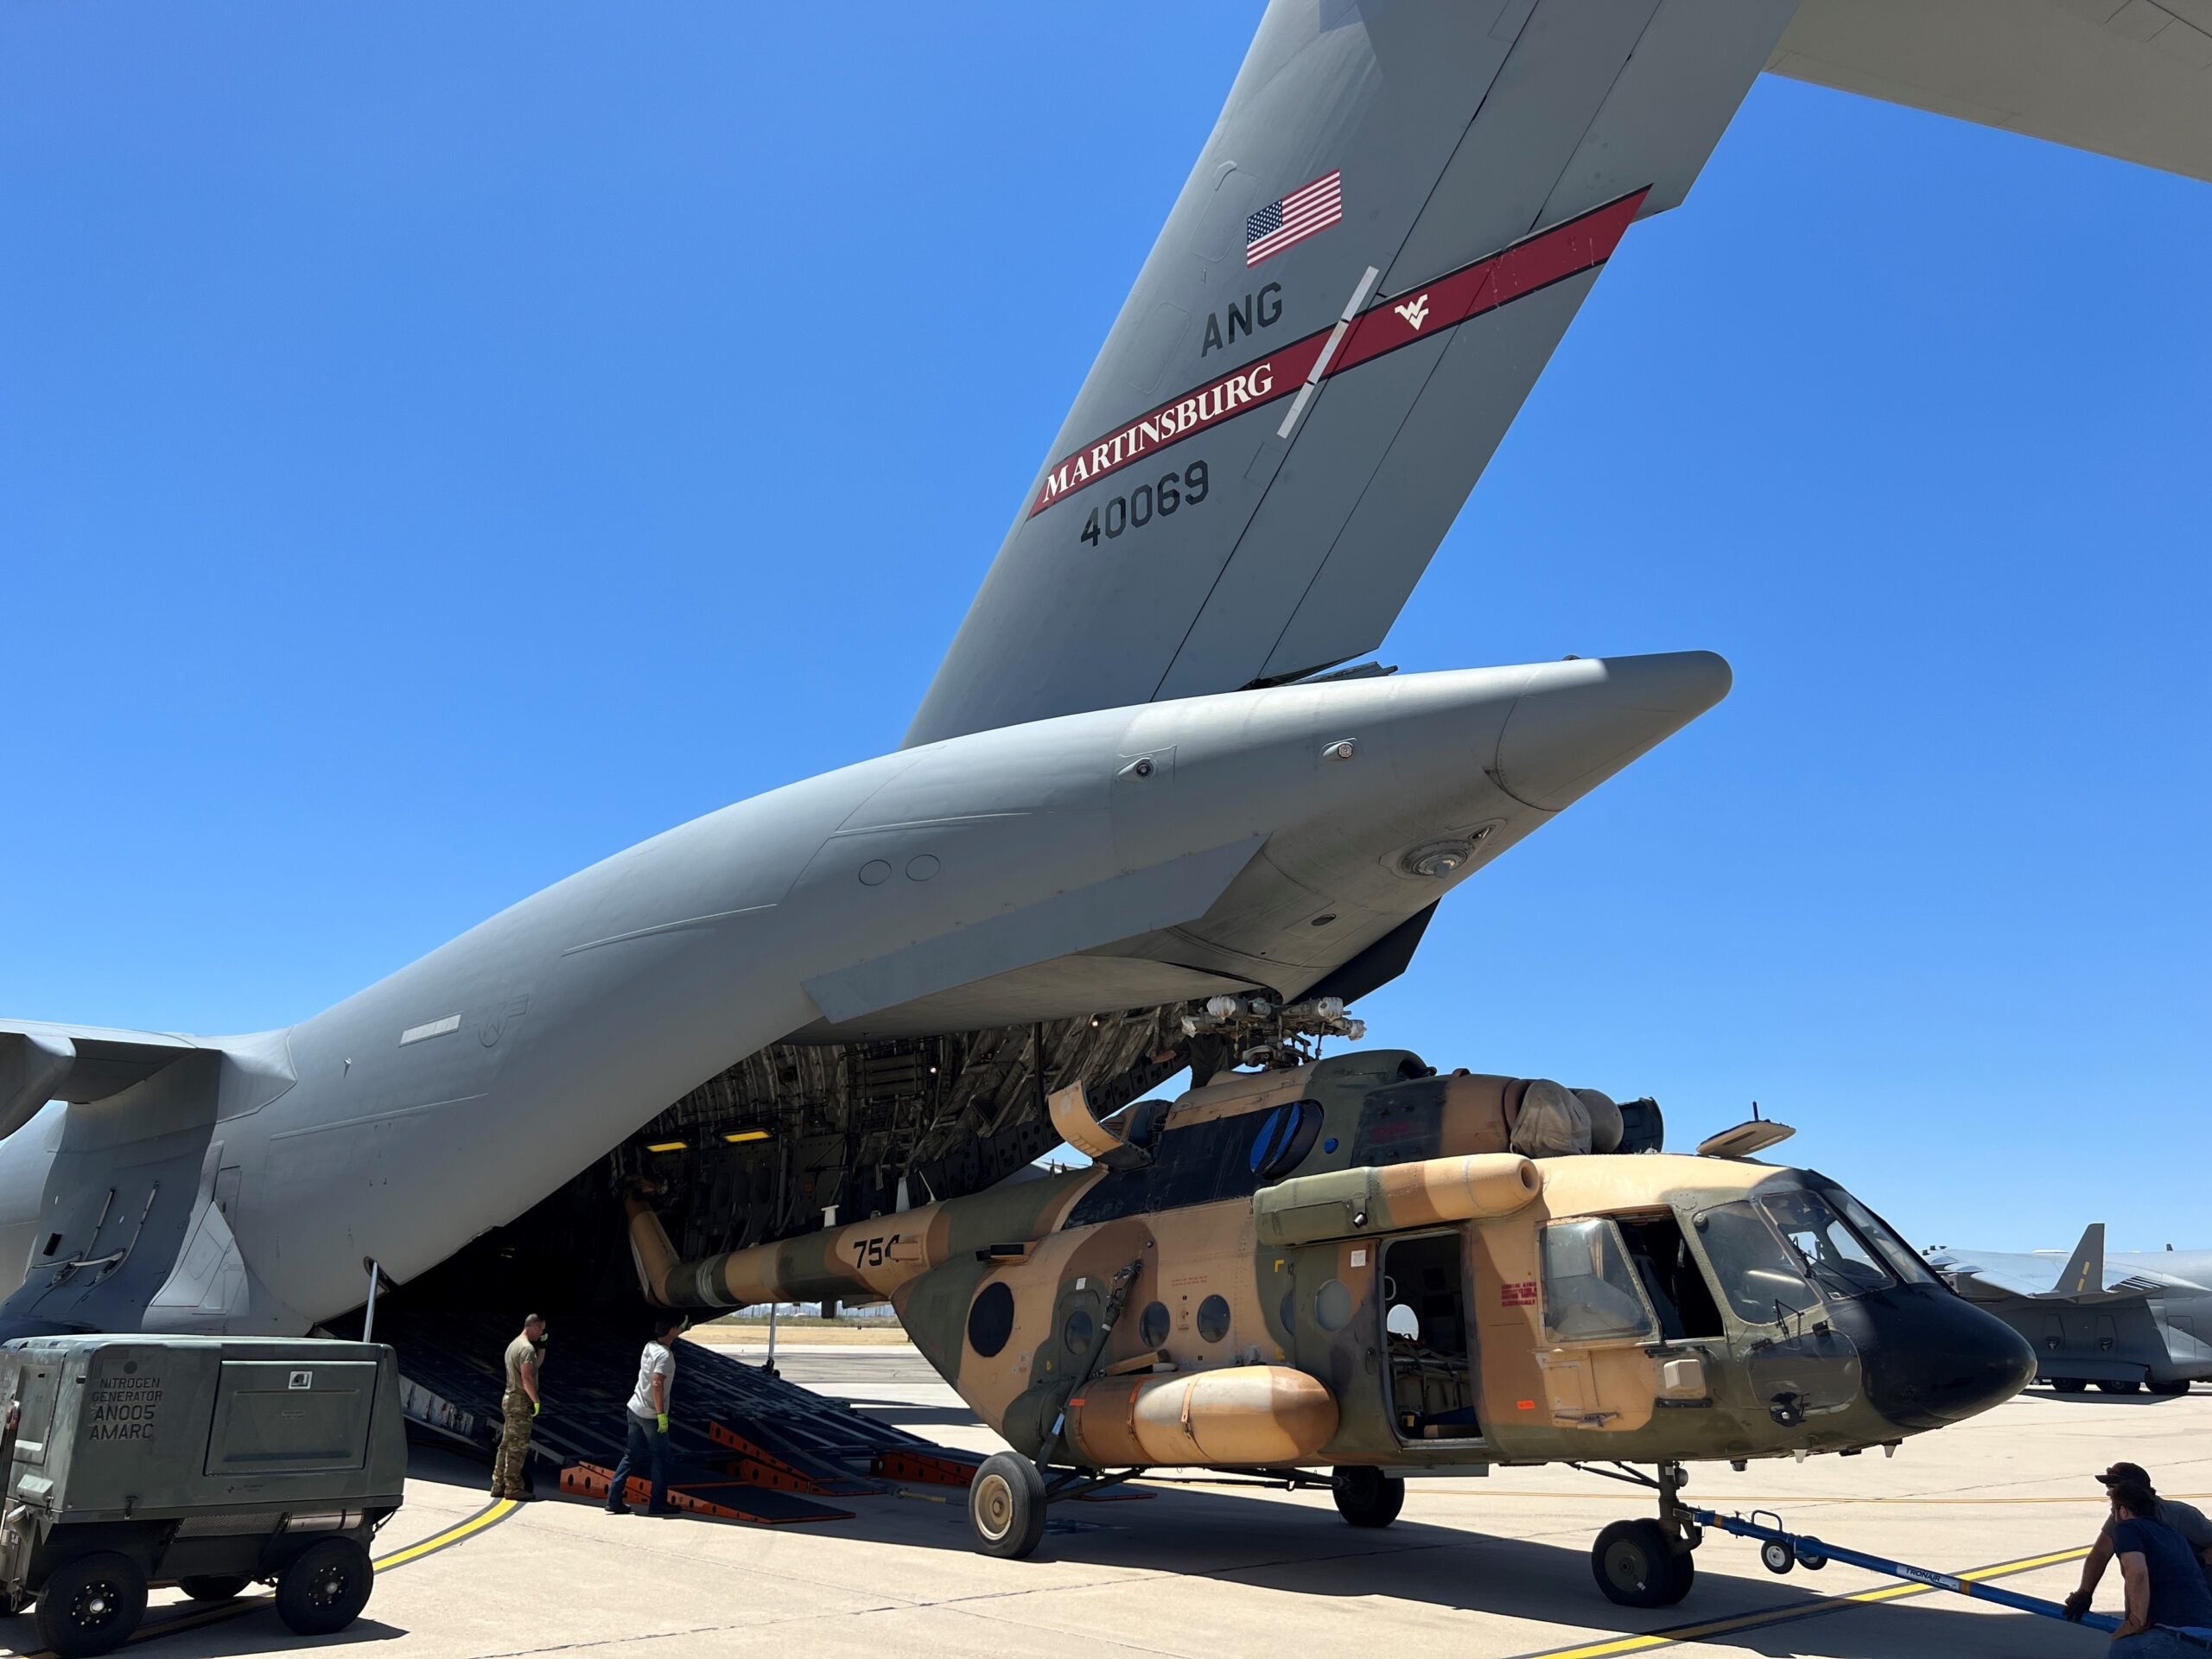 An Mi-17 helicopter is loaded onto a C-17 Globemaster III aircraft at Davis-Monthan Air Force Base, Arizona, May 20, 2022. The C-17, operated by the 167th Airlift Wing of the West Virginia National Guard, transported the helicopter from Davis-Monthan to Sliač Airport in Slovakia. The Mi-17 is one of 16 helicopters and numerous other weapons systems the United States has committed to the Ukrainian military. (U.S. Air National Guard photo by Chief Master Sgt. Mark Snyder)